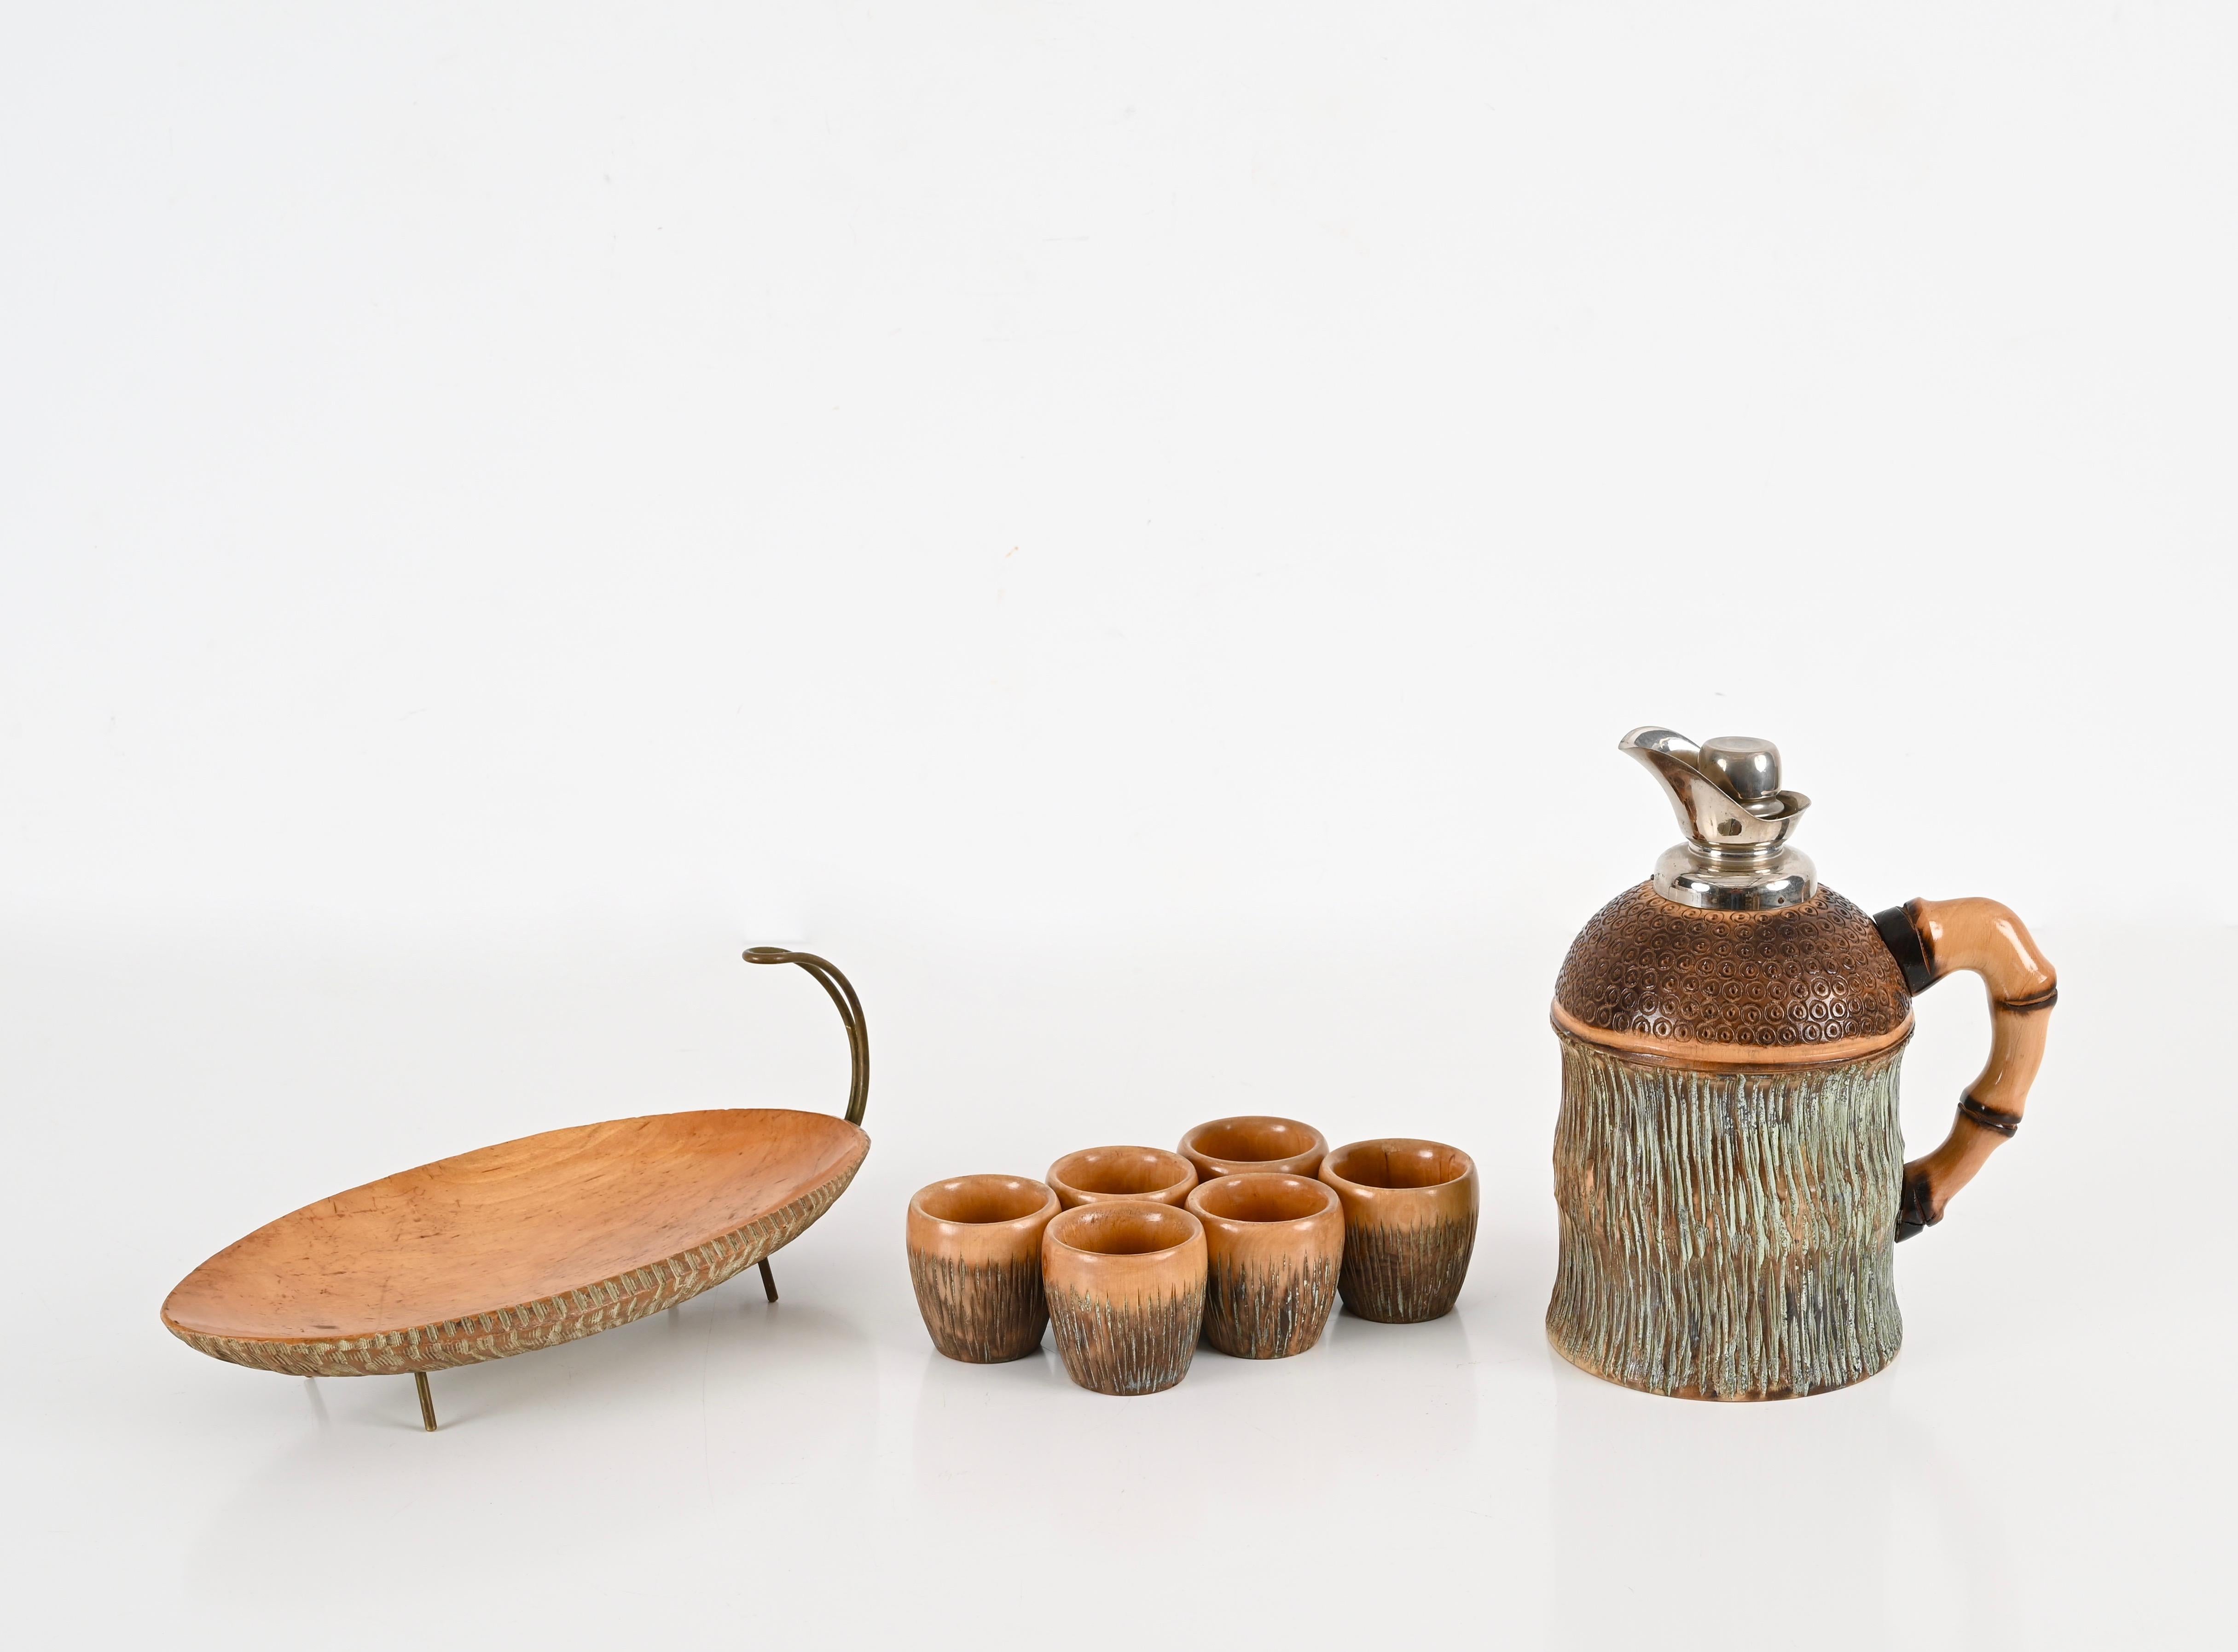 Aldo Tura Decorative Bar Set in Carved Wood and Brass, Macabo, Italy 1950s For Sale 5